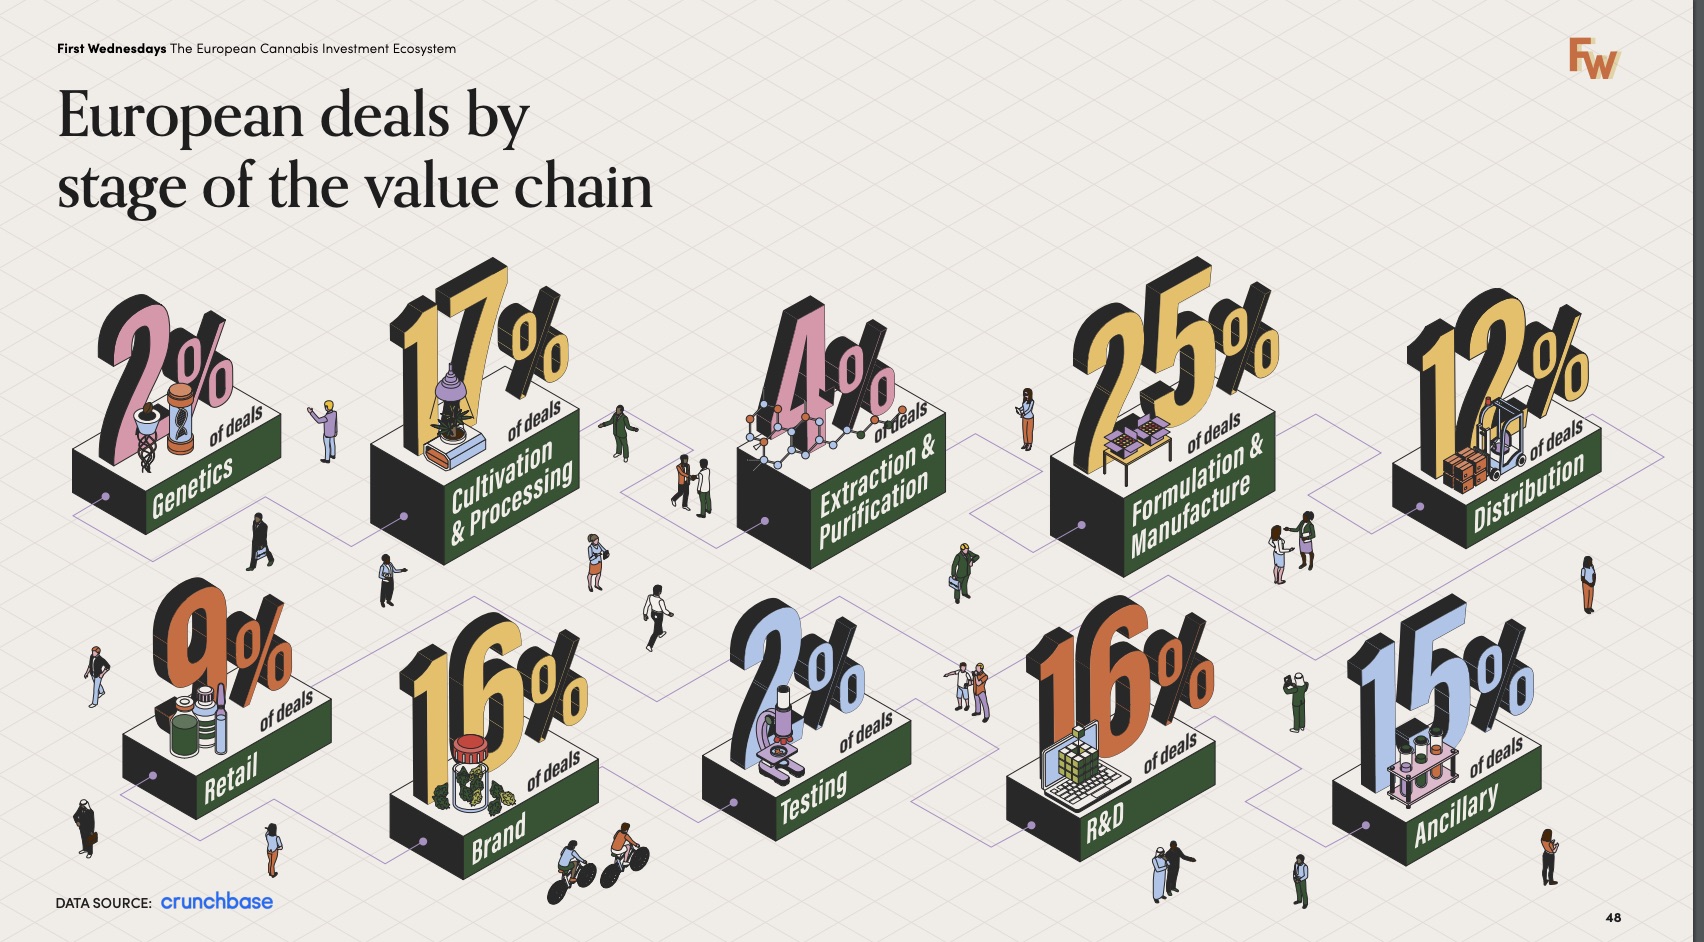 European deals by stage of the value chain graphic